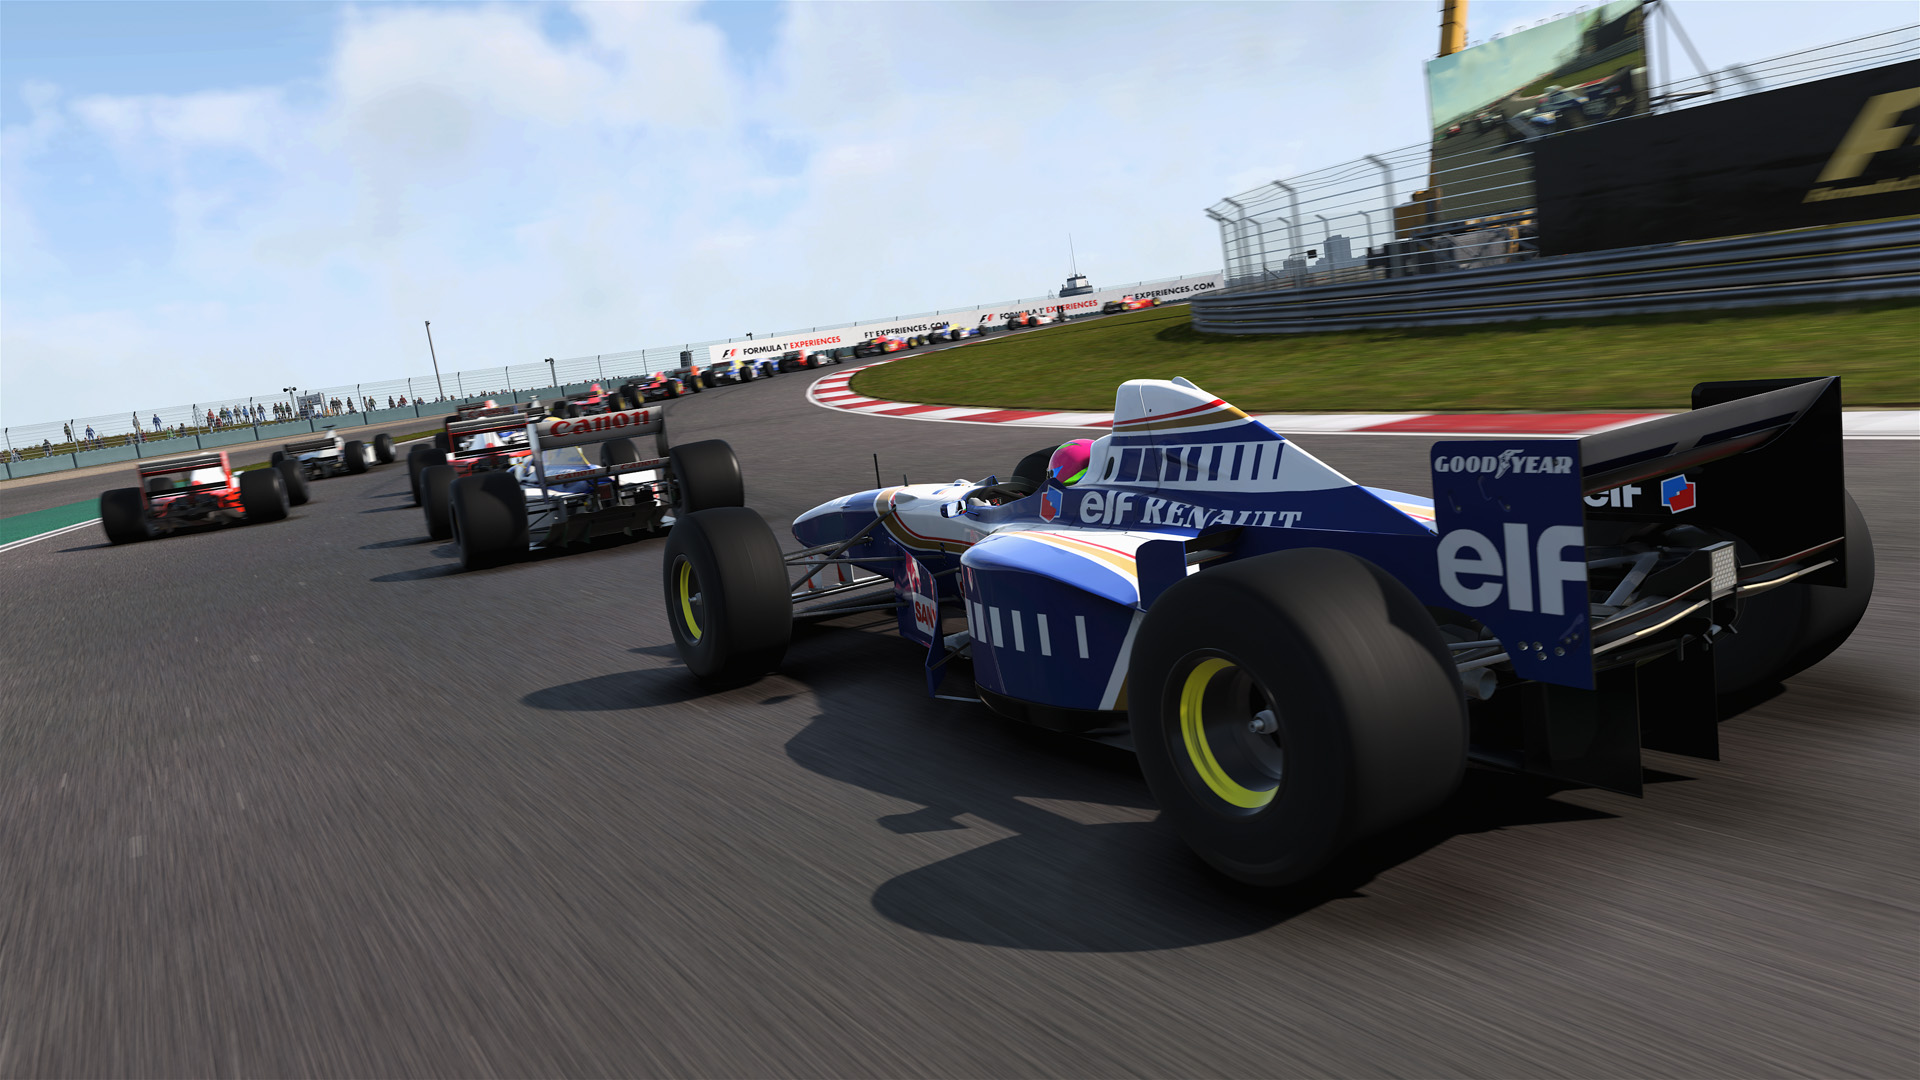 Media asset in full size related to 3dfxzone.it news item entitled as follows: Codemasters annuncia la disponibilit del game F1 2017 per PC, PS4 e Xbox One | Image Name: news26921_F1-2017_Screenshot_1.jpg